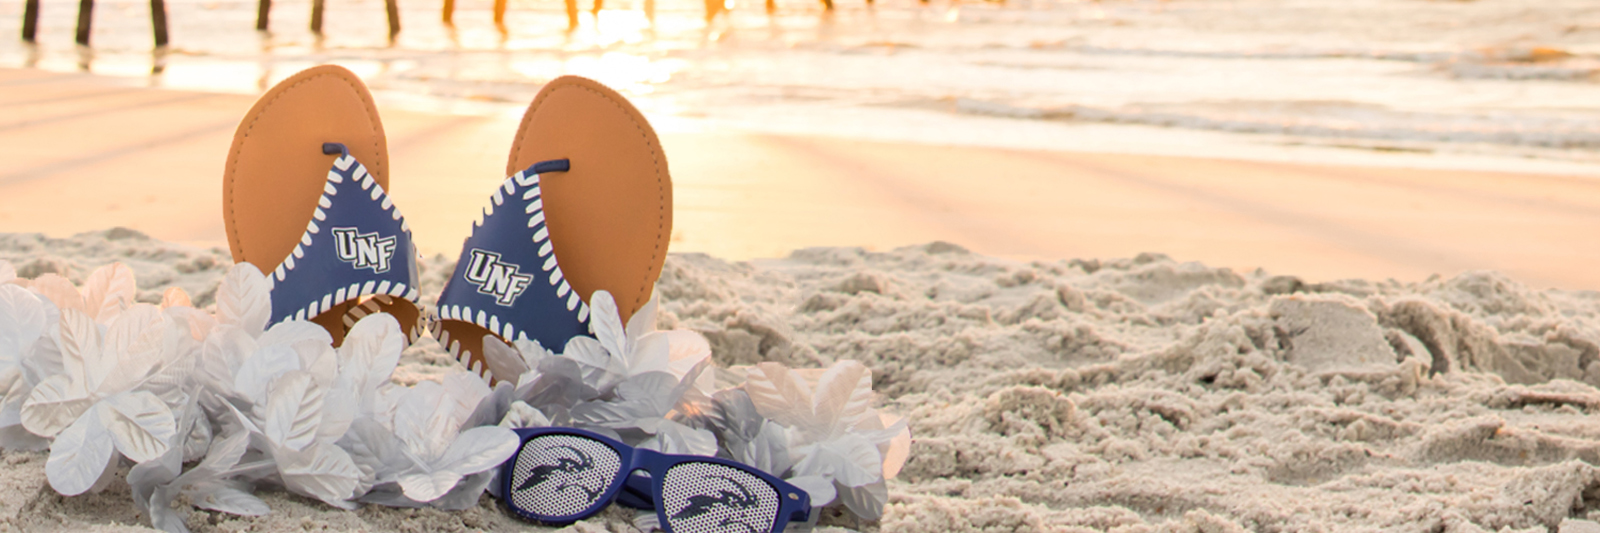 File: Pair of UNF flip flops, lei necklaces, and sunglasses on the beach with pier in background